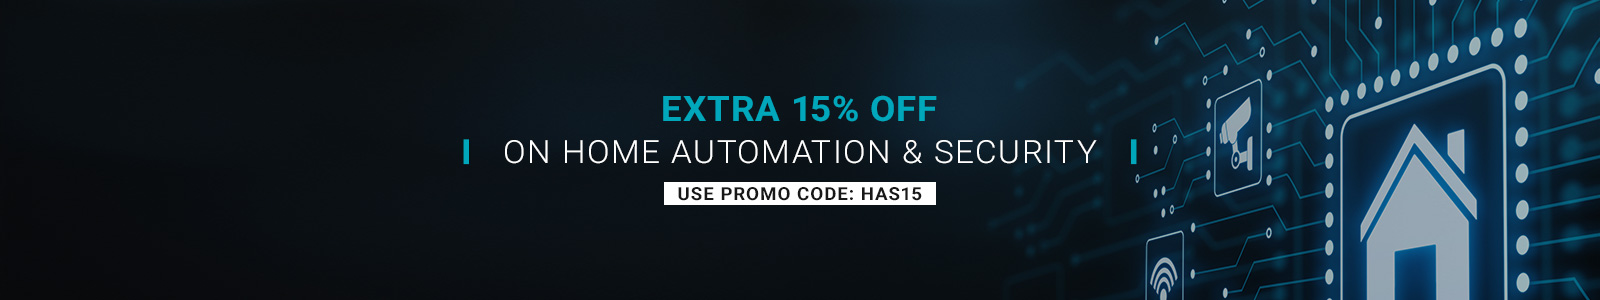 Extra 15% off on Home Automation & Security
Use promo code: HAS15
Shop Now